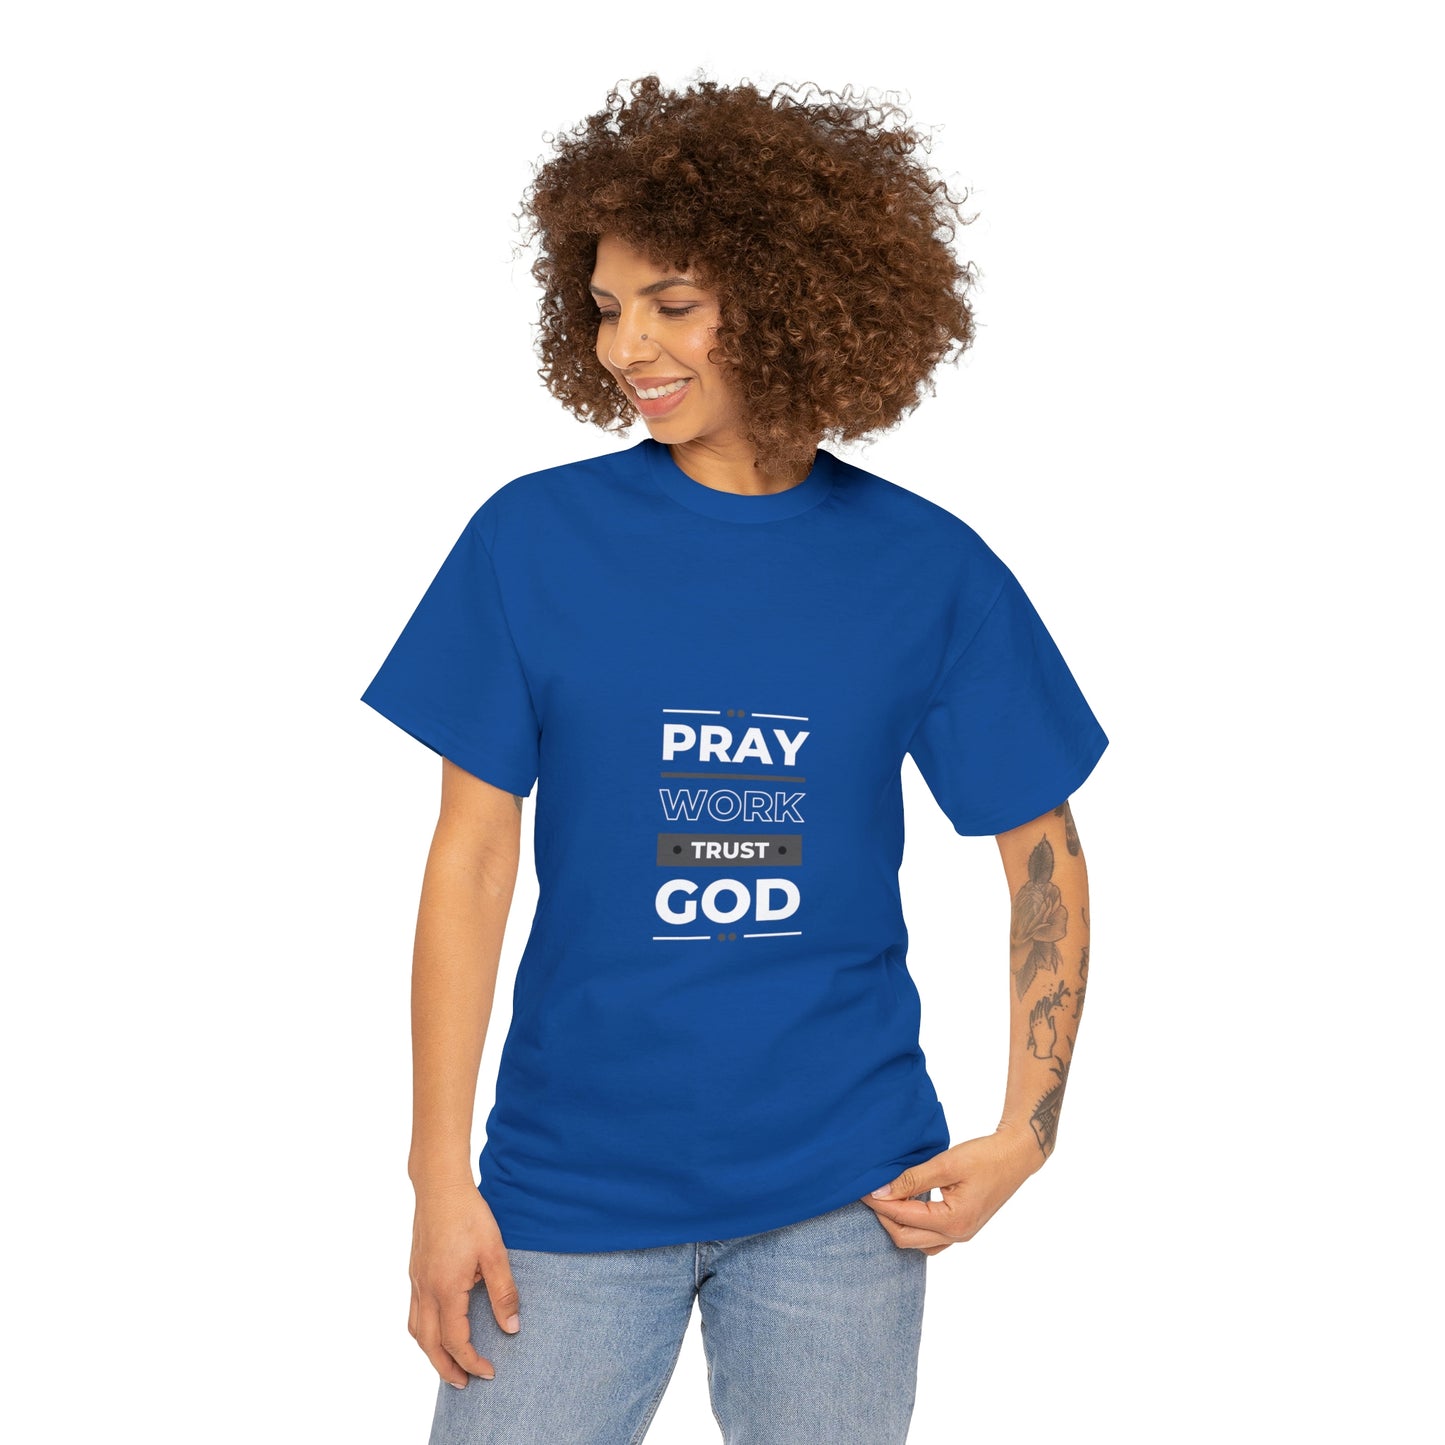 Prayer works trust God Your Style  Our Custom Printed Tee Unique Design Comfortable Fit  Personalized  You.  color, funny tshirt tee shirt